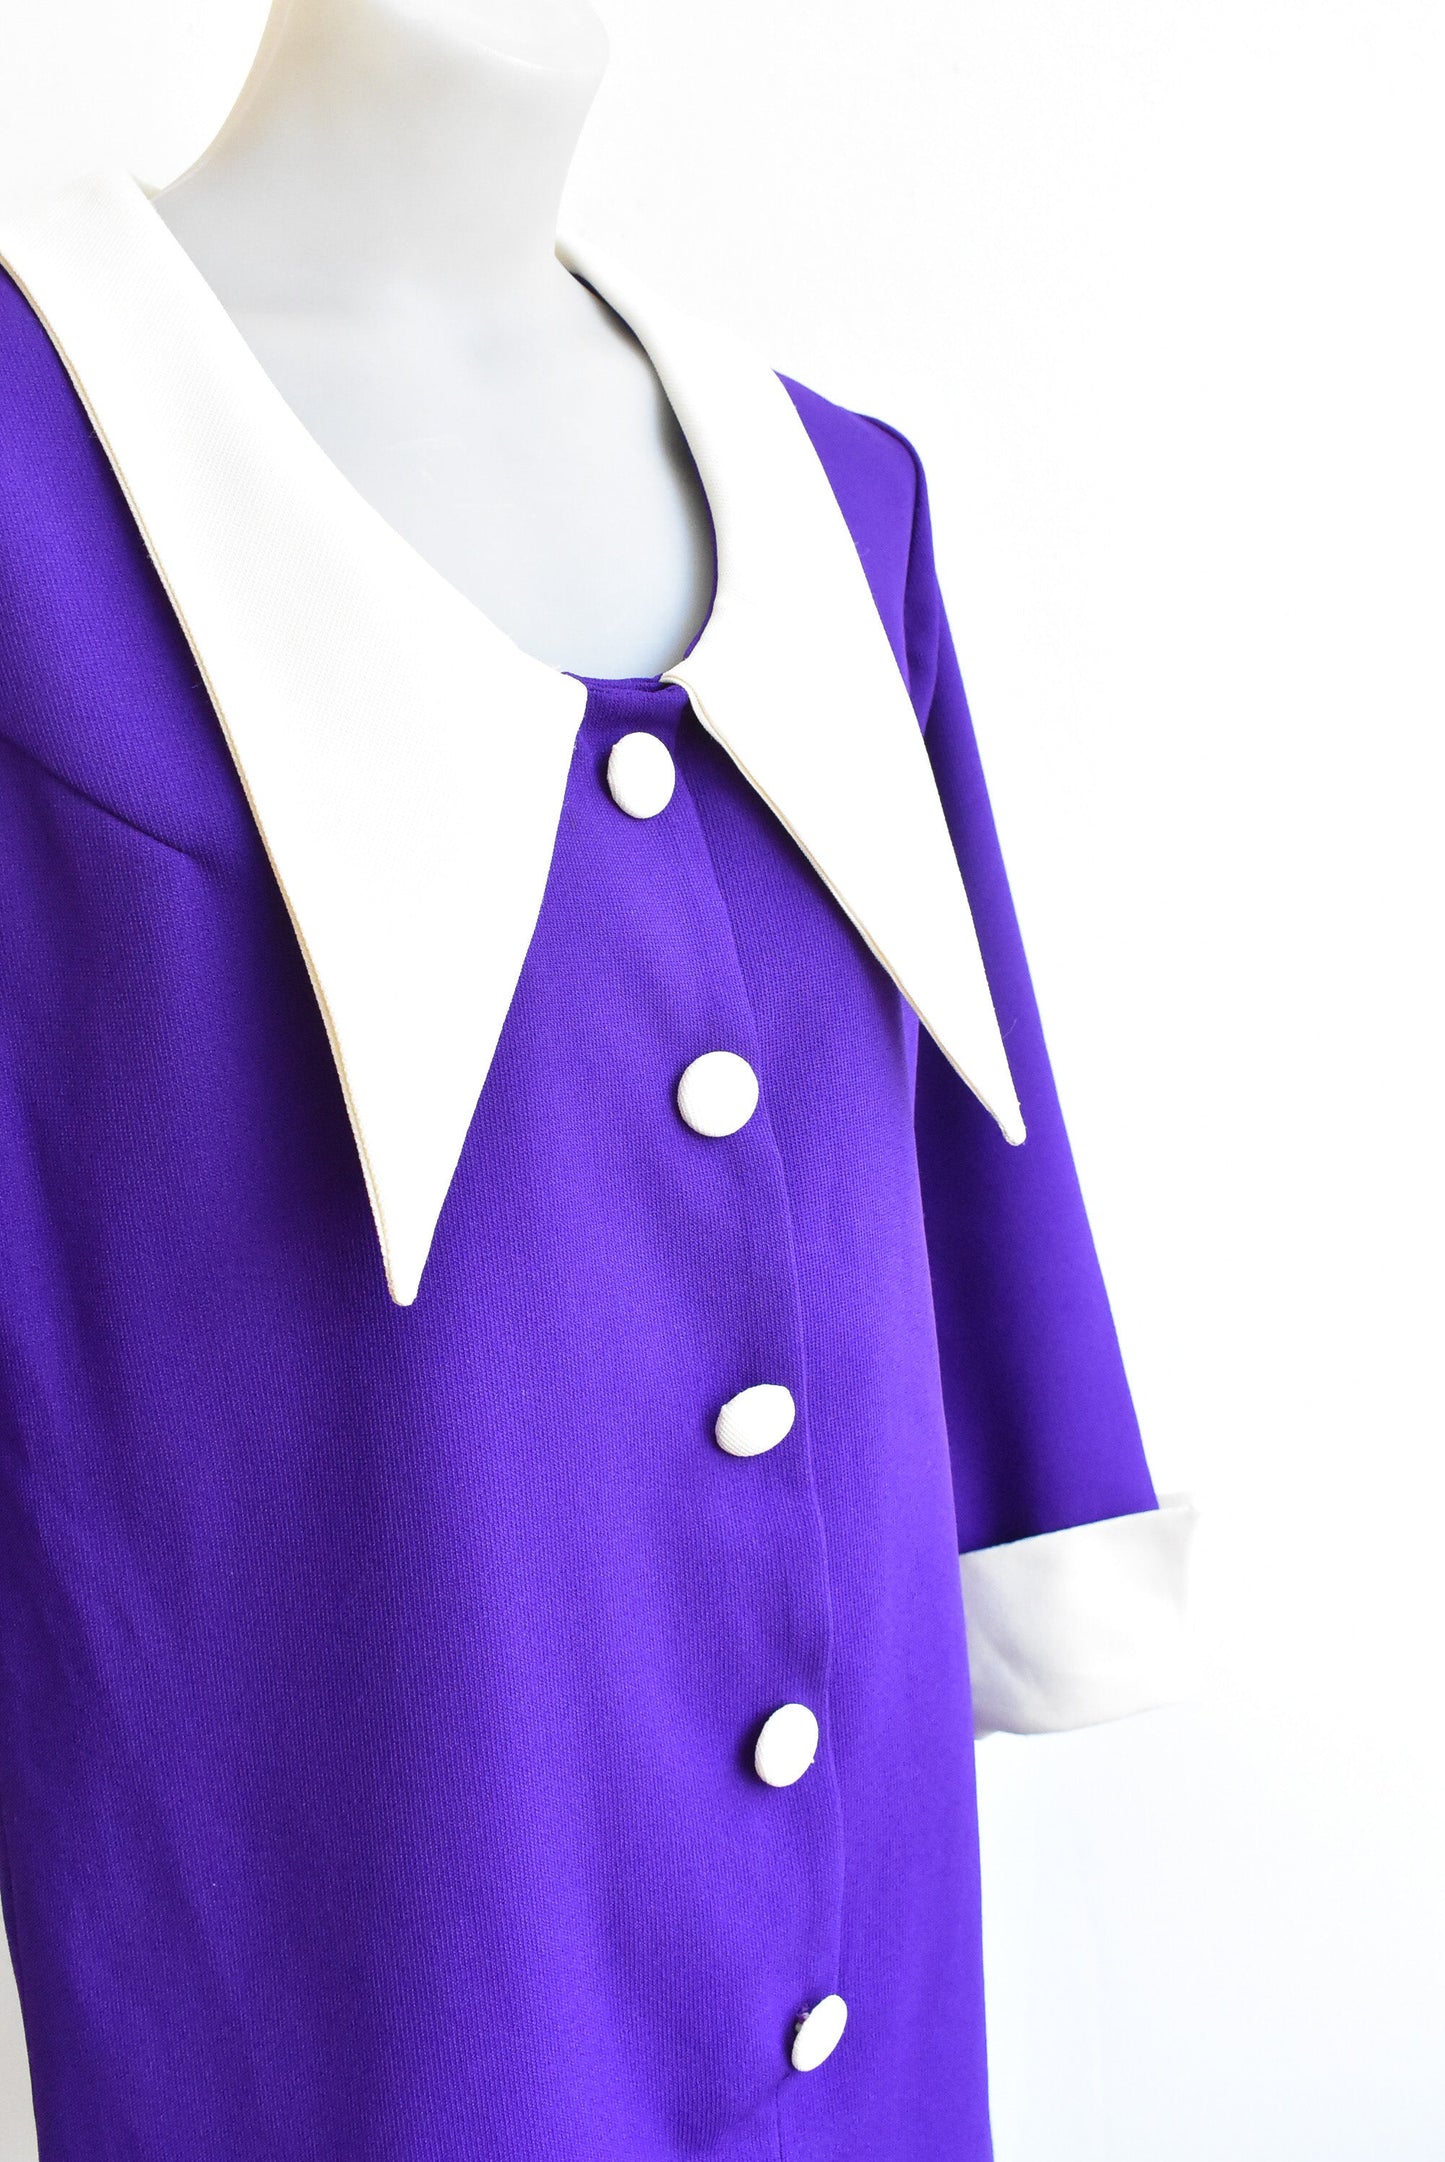 Homemade 60s vintage mini-dress, vibrant purple with contrast pointy collar